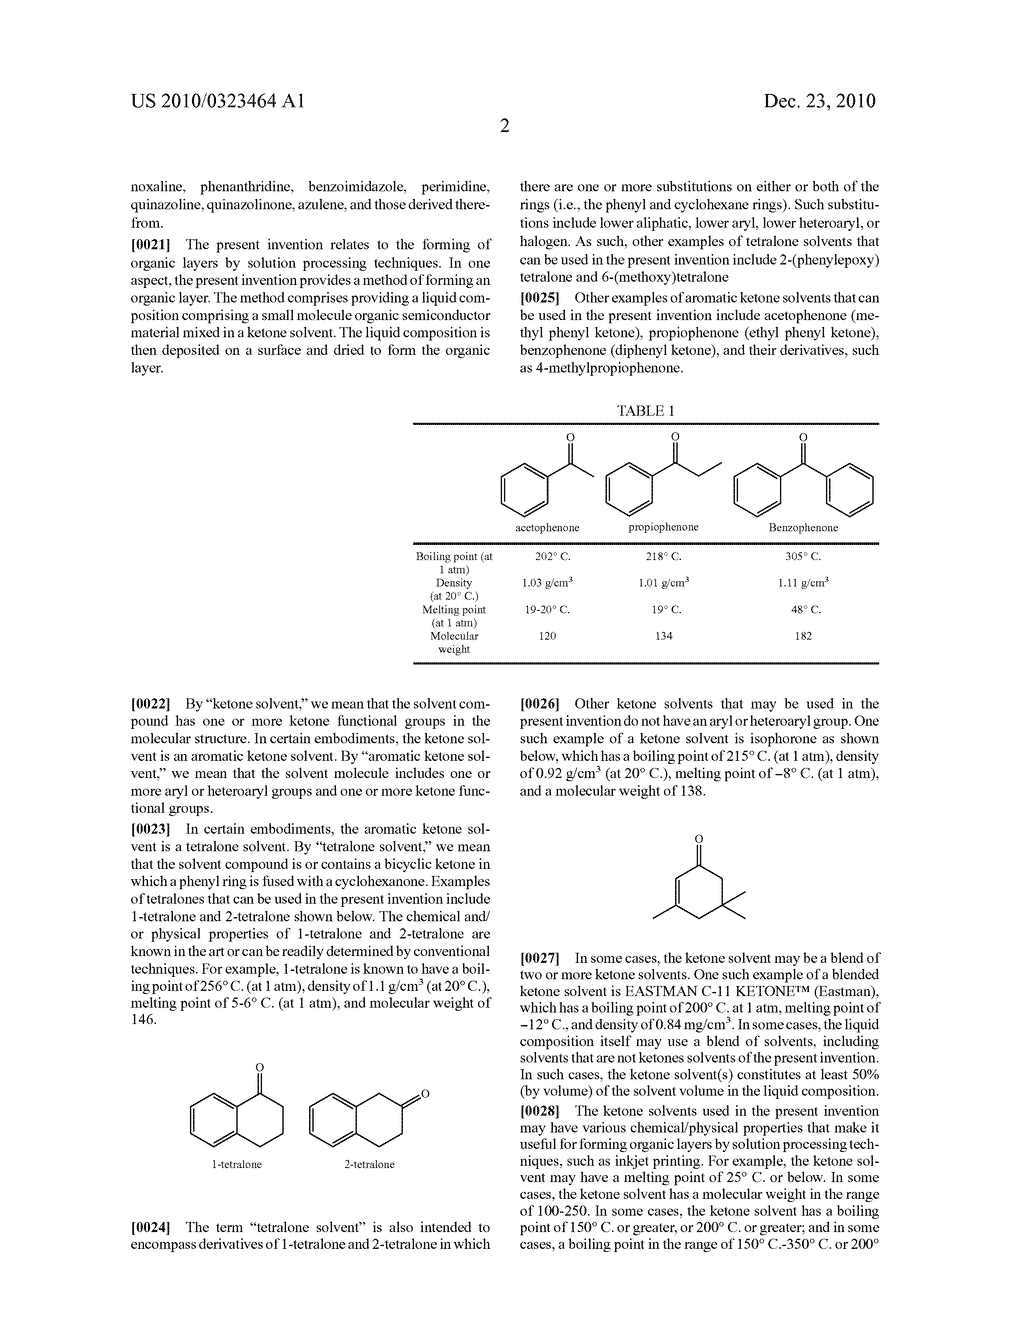 LIQUID COMPOSITIONS FOR INKJET PRINTING OF ORGANIC LAYERS OR OTHER USES - diagram, schematic, and image 13